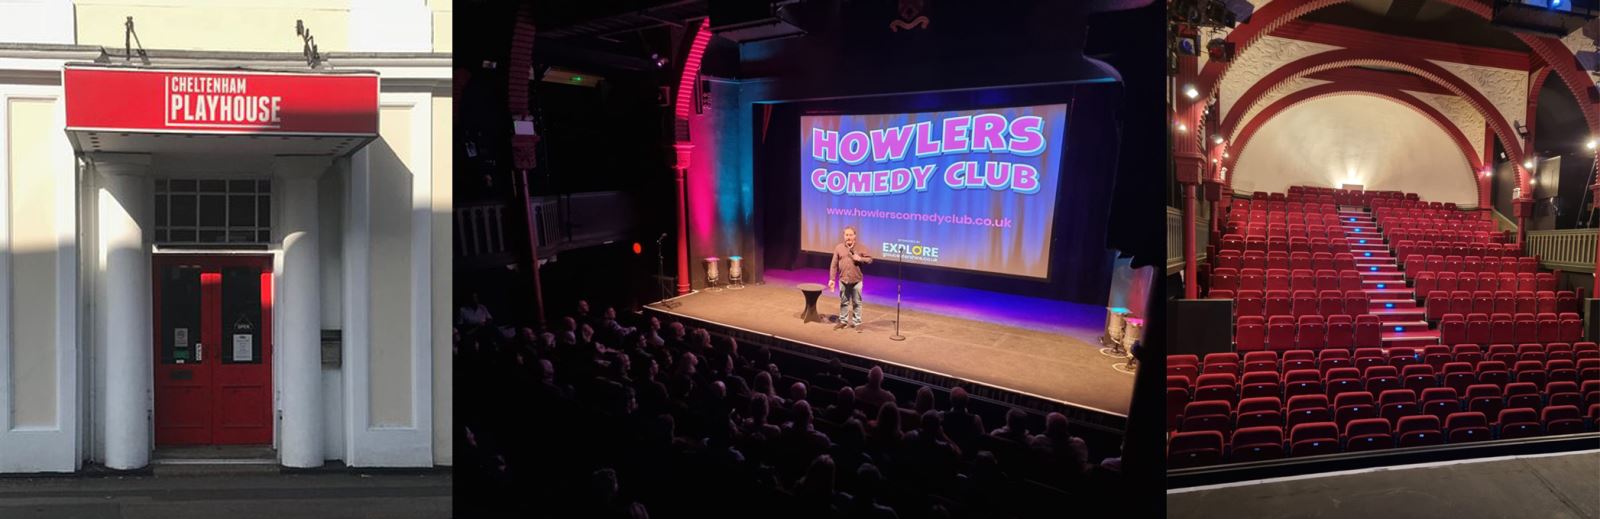 Howlers Comedy Club at The Cheltenham Playhouse